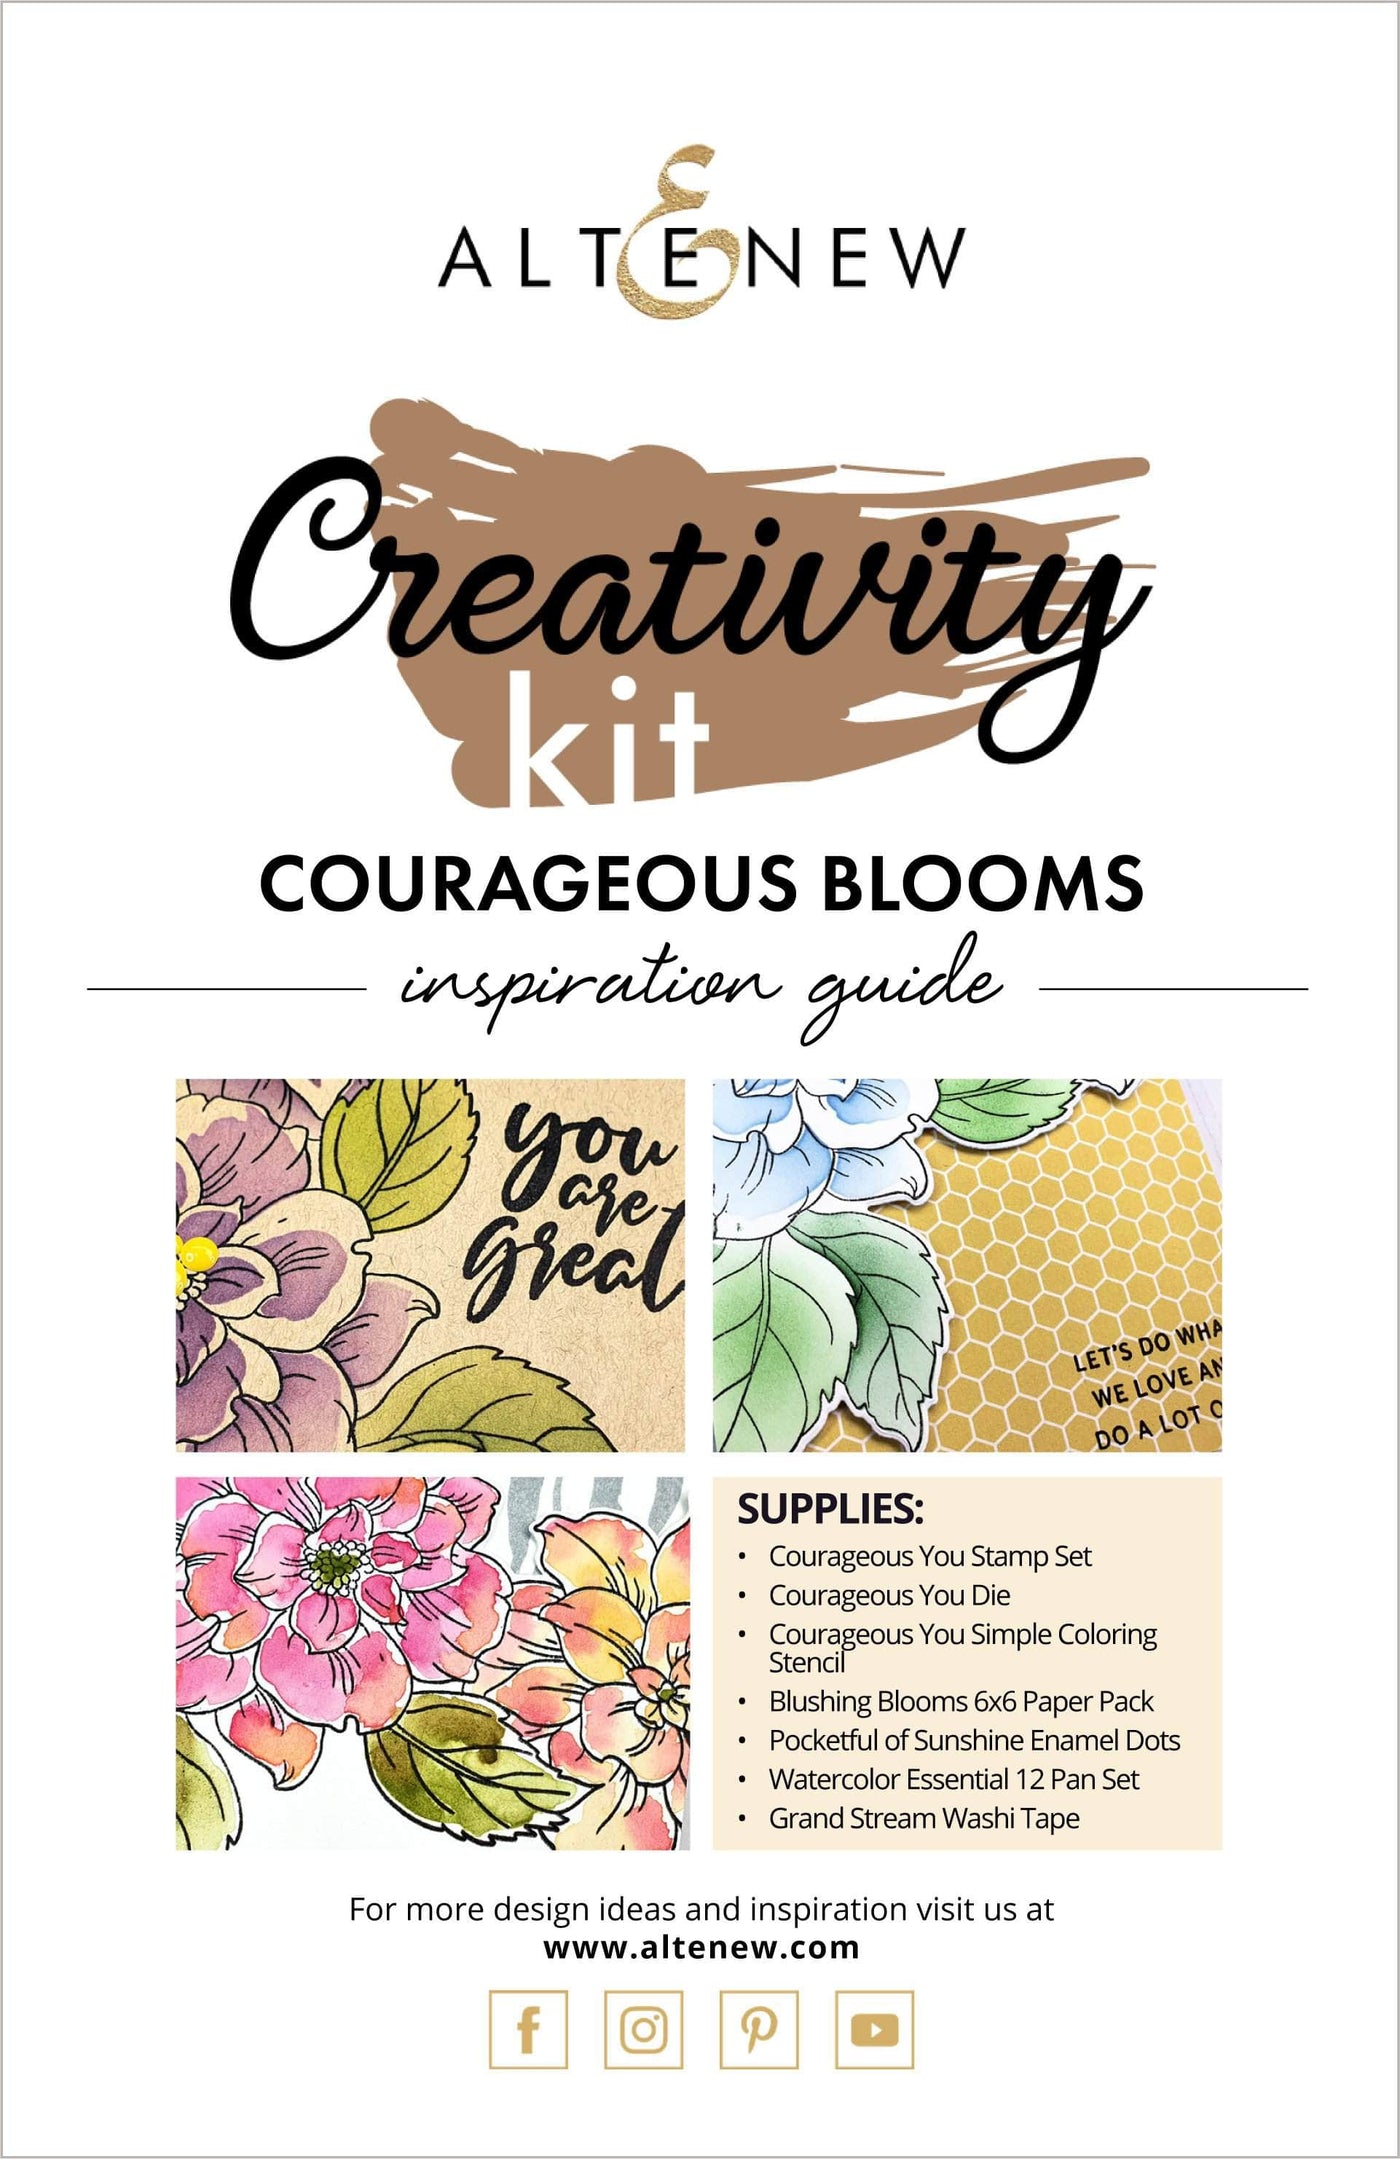 Printed Media Courageous Blooms Creativity Cardmaking Kit Inspiration Guide